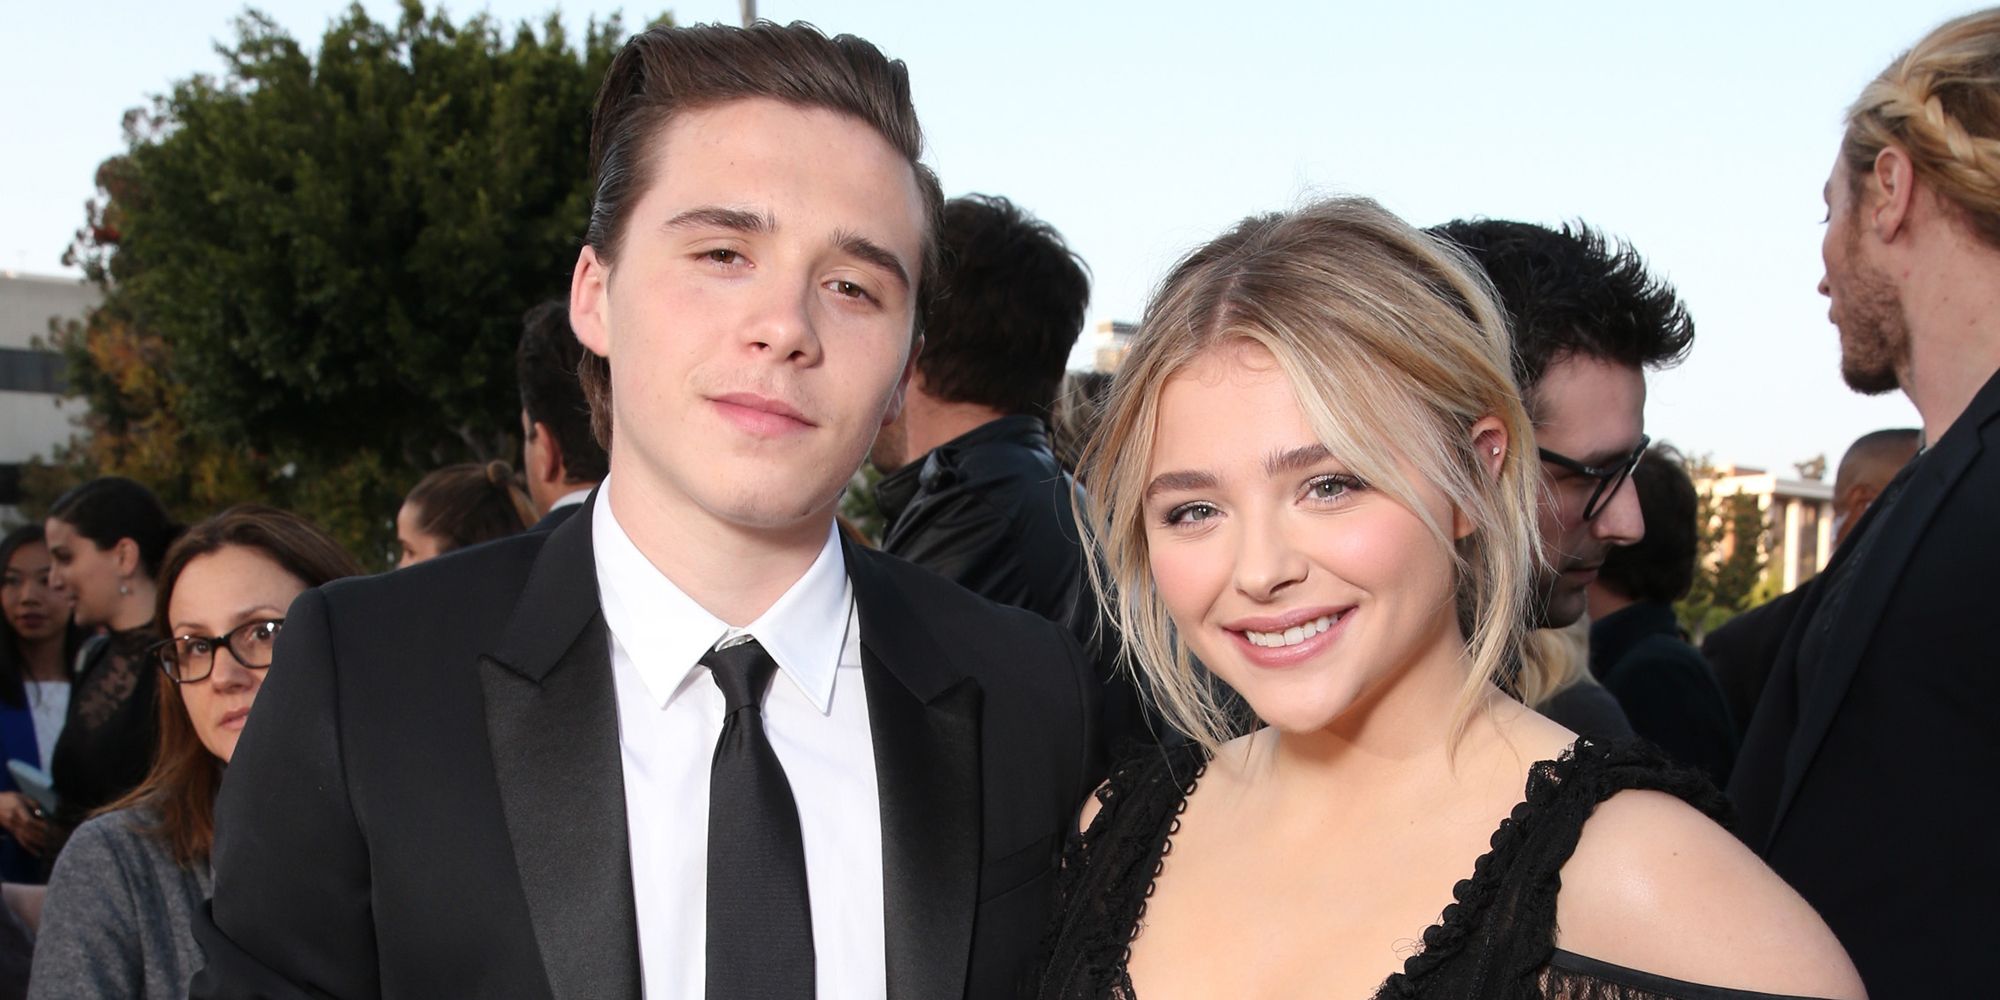 Chloë Grace Moretz and Brooklyn Beckham Wear Matching Sneakers on Date